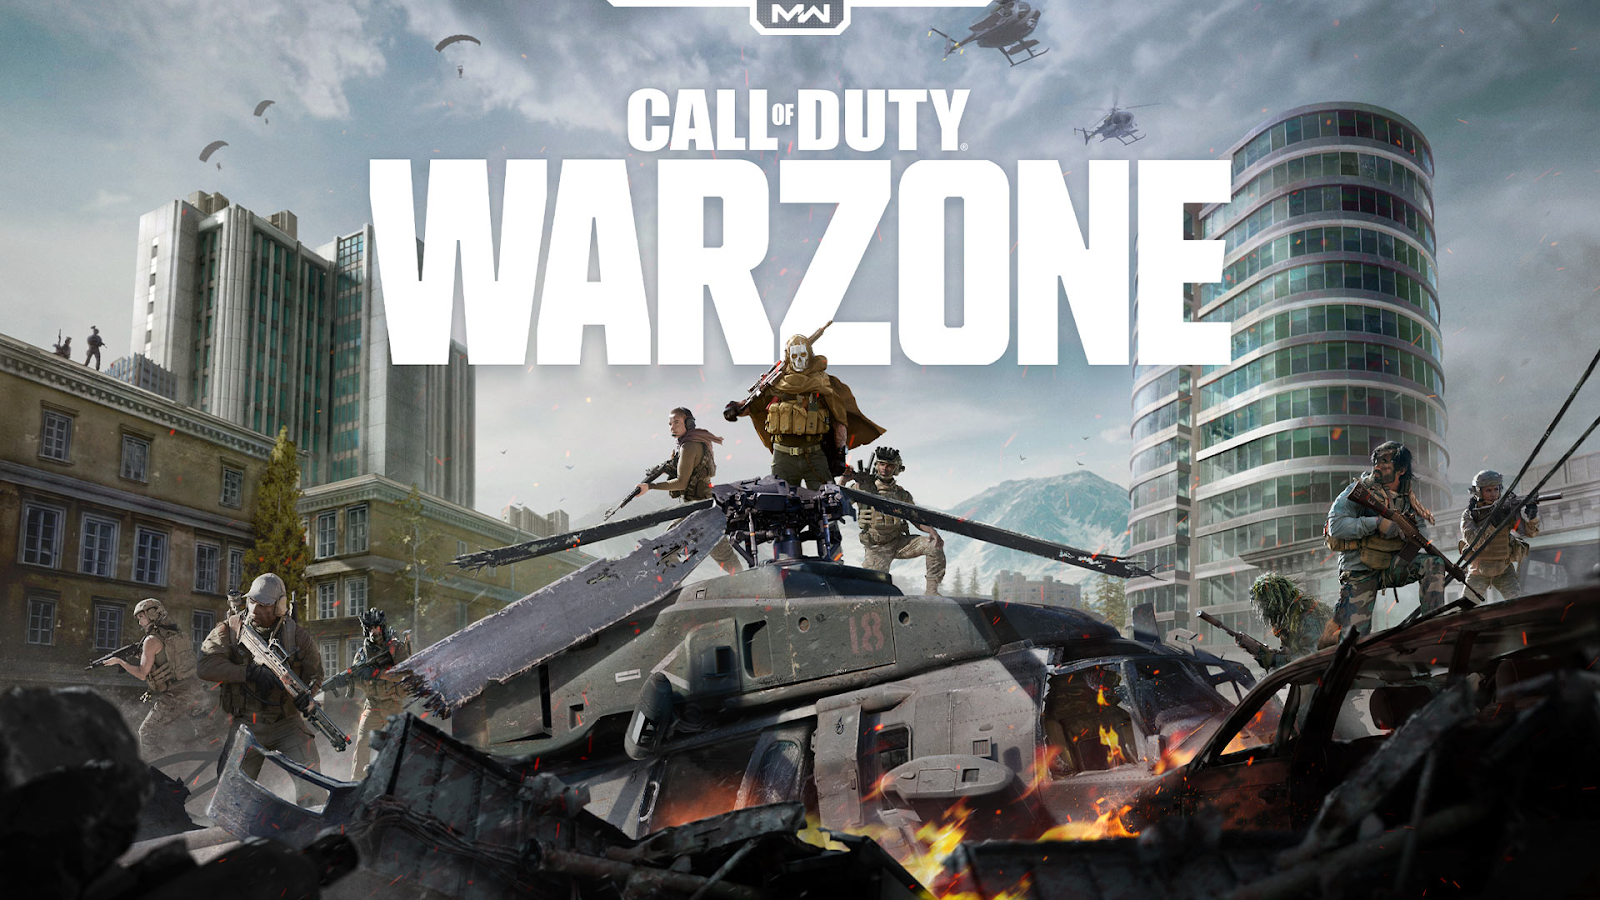 4. Call of Duty: Warzone